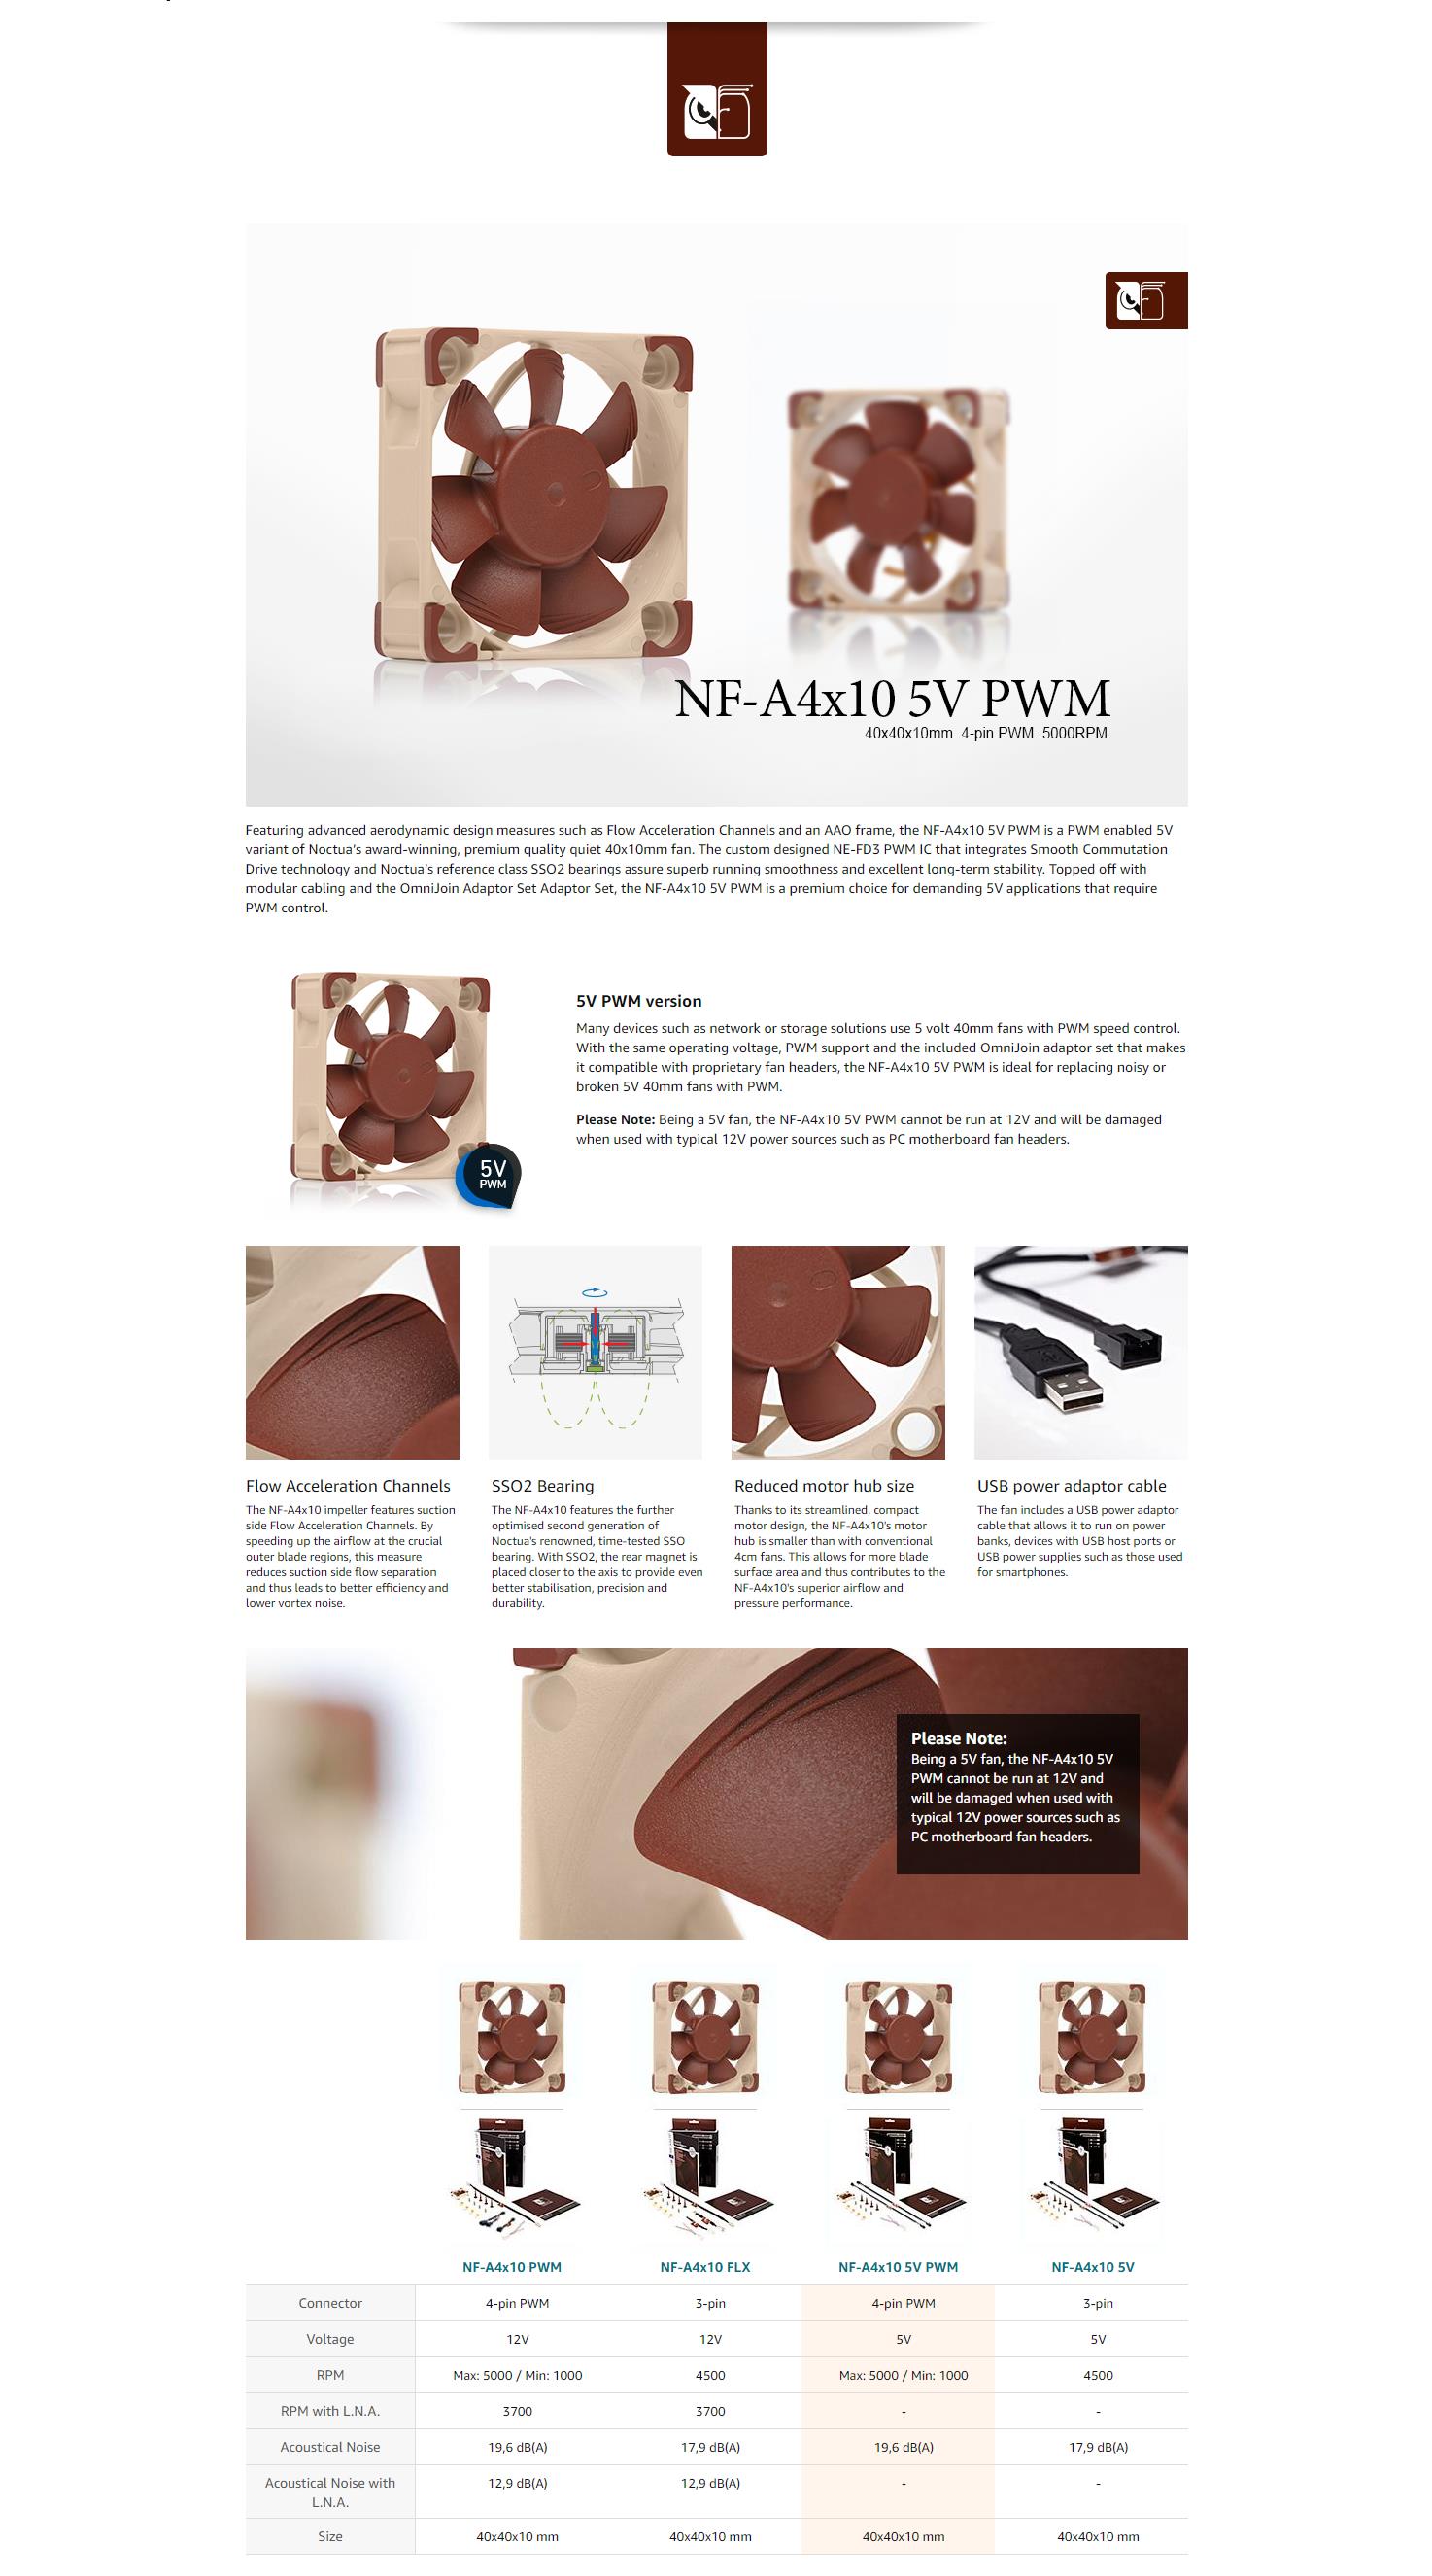 A large marketing image providing additional information about the product Noctua NF-A4x10 5V PWM - 40mm x 10mm 5000RPM Cooling Fan - Additional alt info not provided